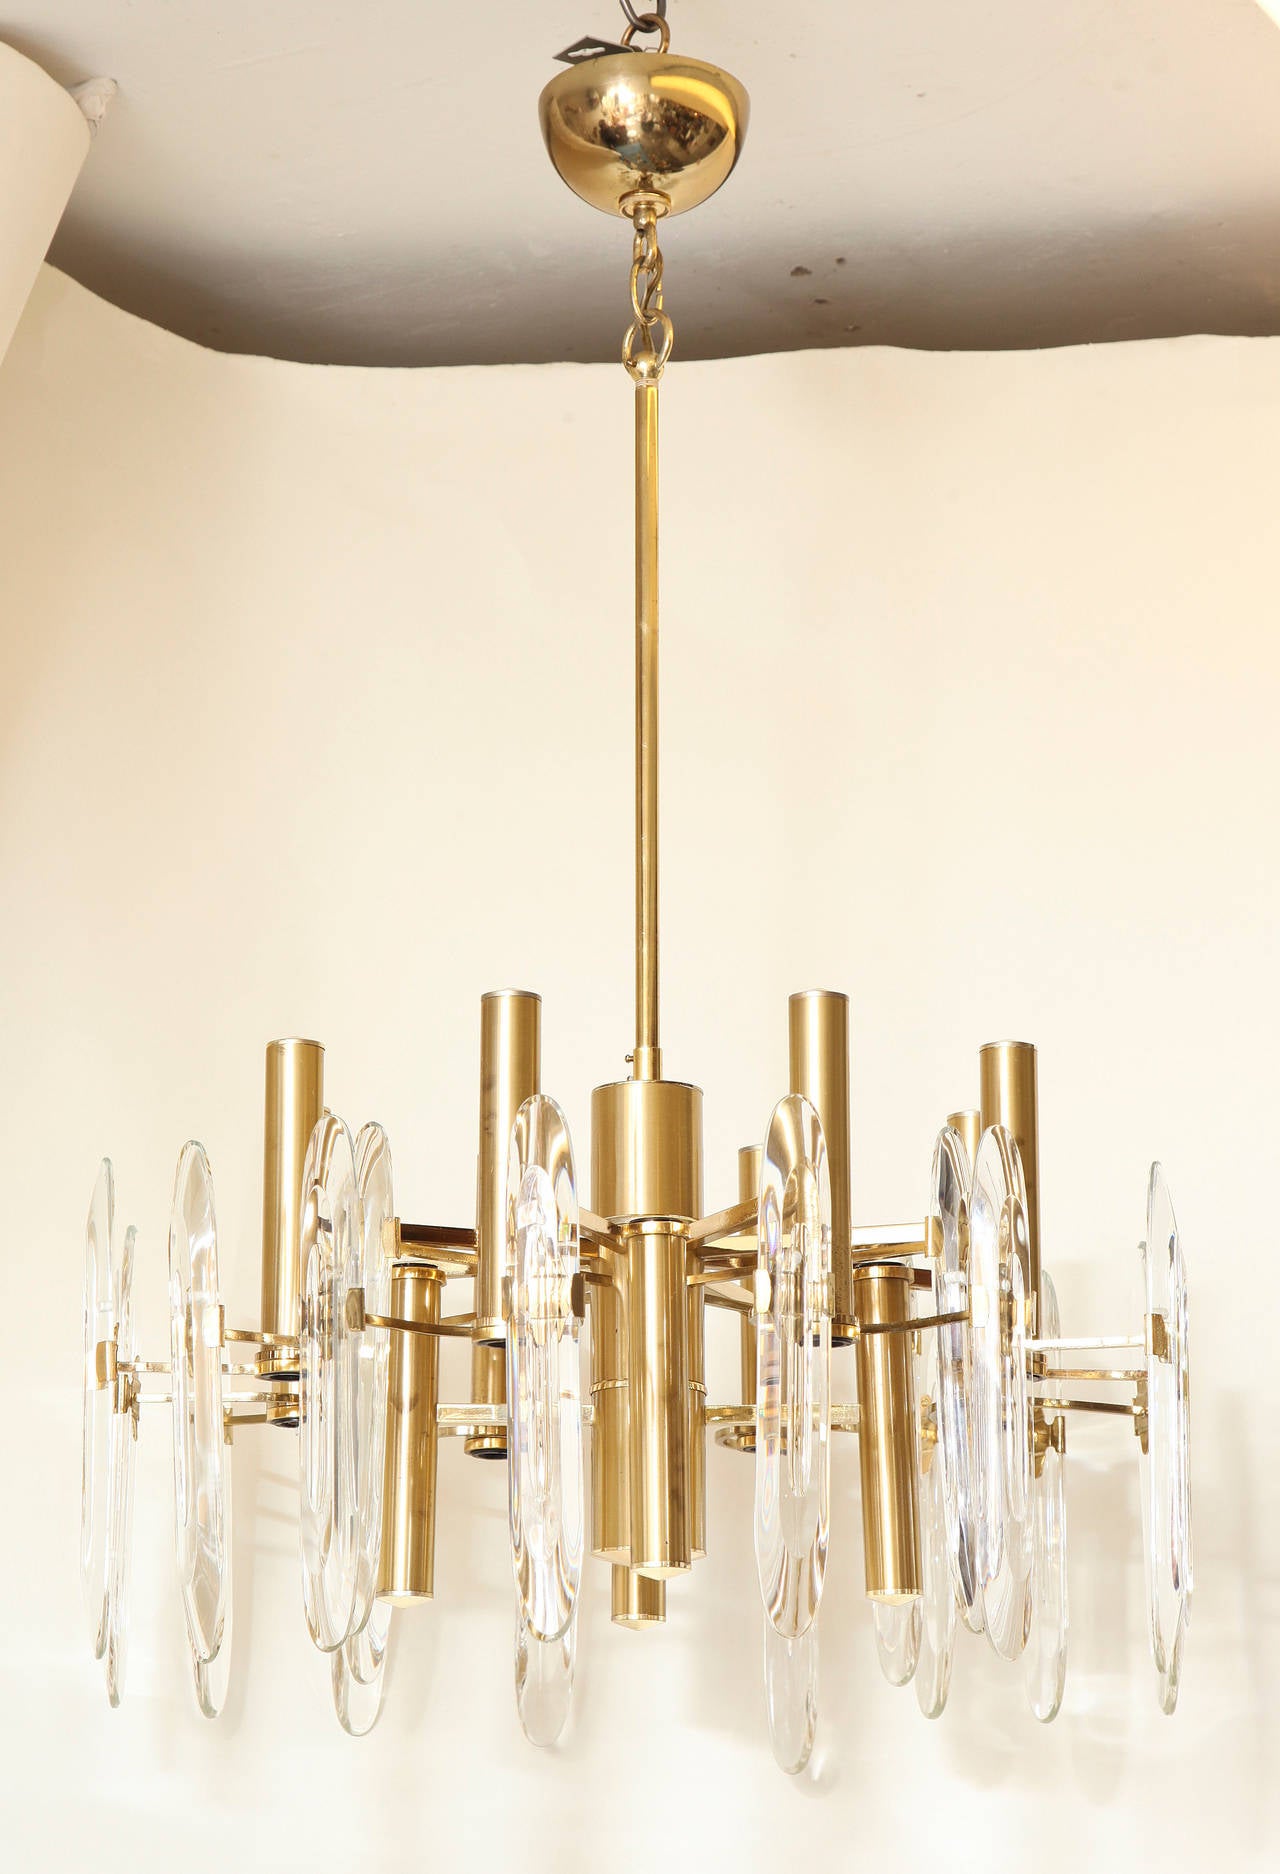 An American contemporary design 12-light chandelier with brushed finished matte brass frame having lights within acrylic spear shaped elements with rounded ends interspersed among brass cylindrical elements issuing light from above and below.